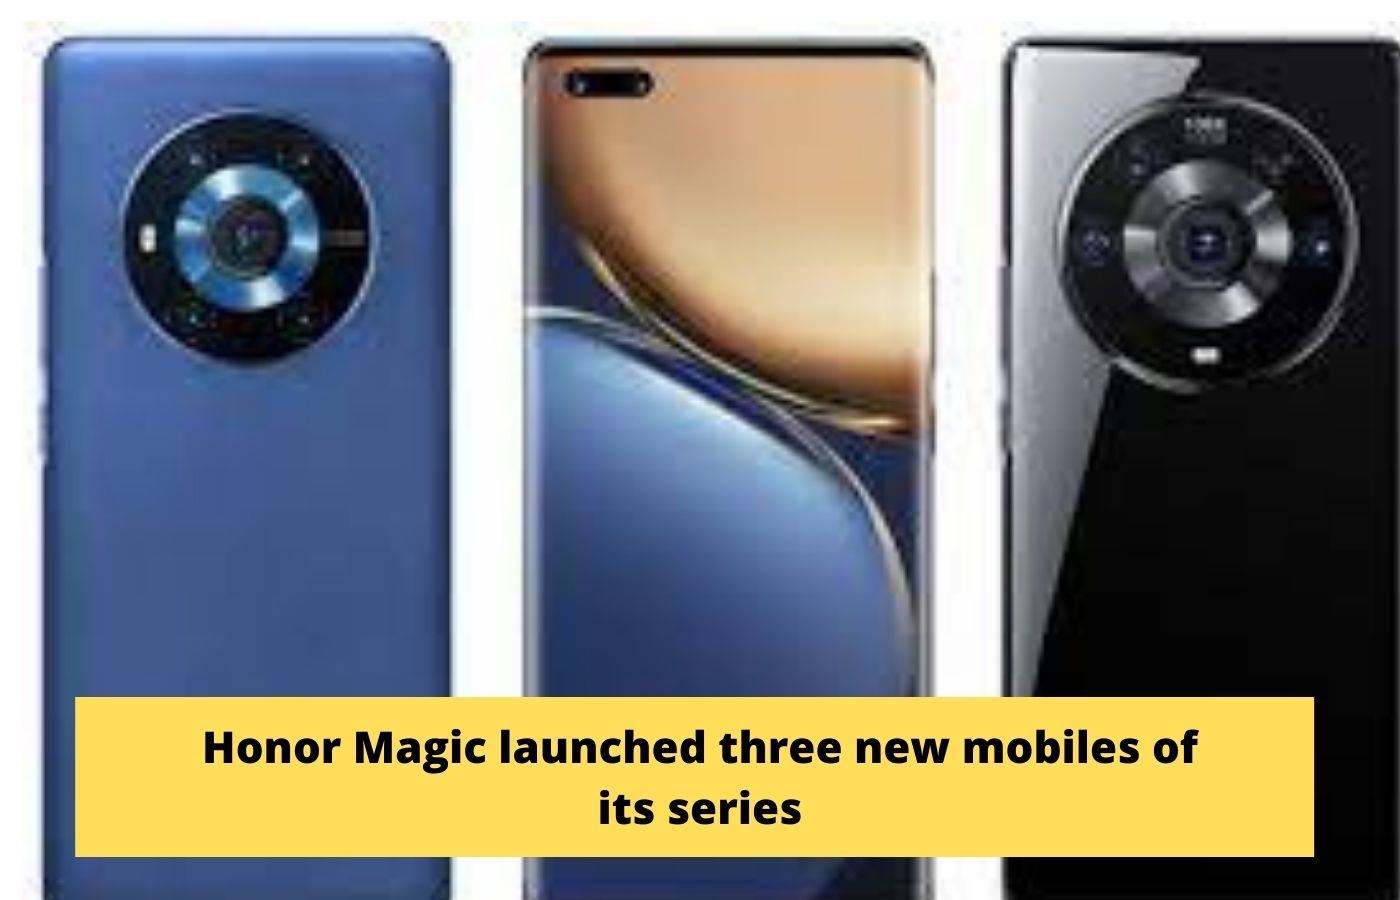 Honor Magic launched three new mobiles of its series